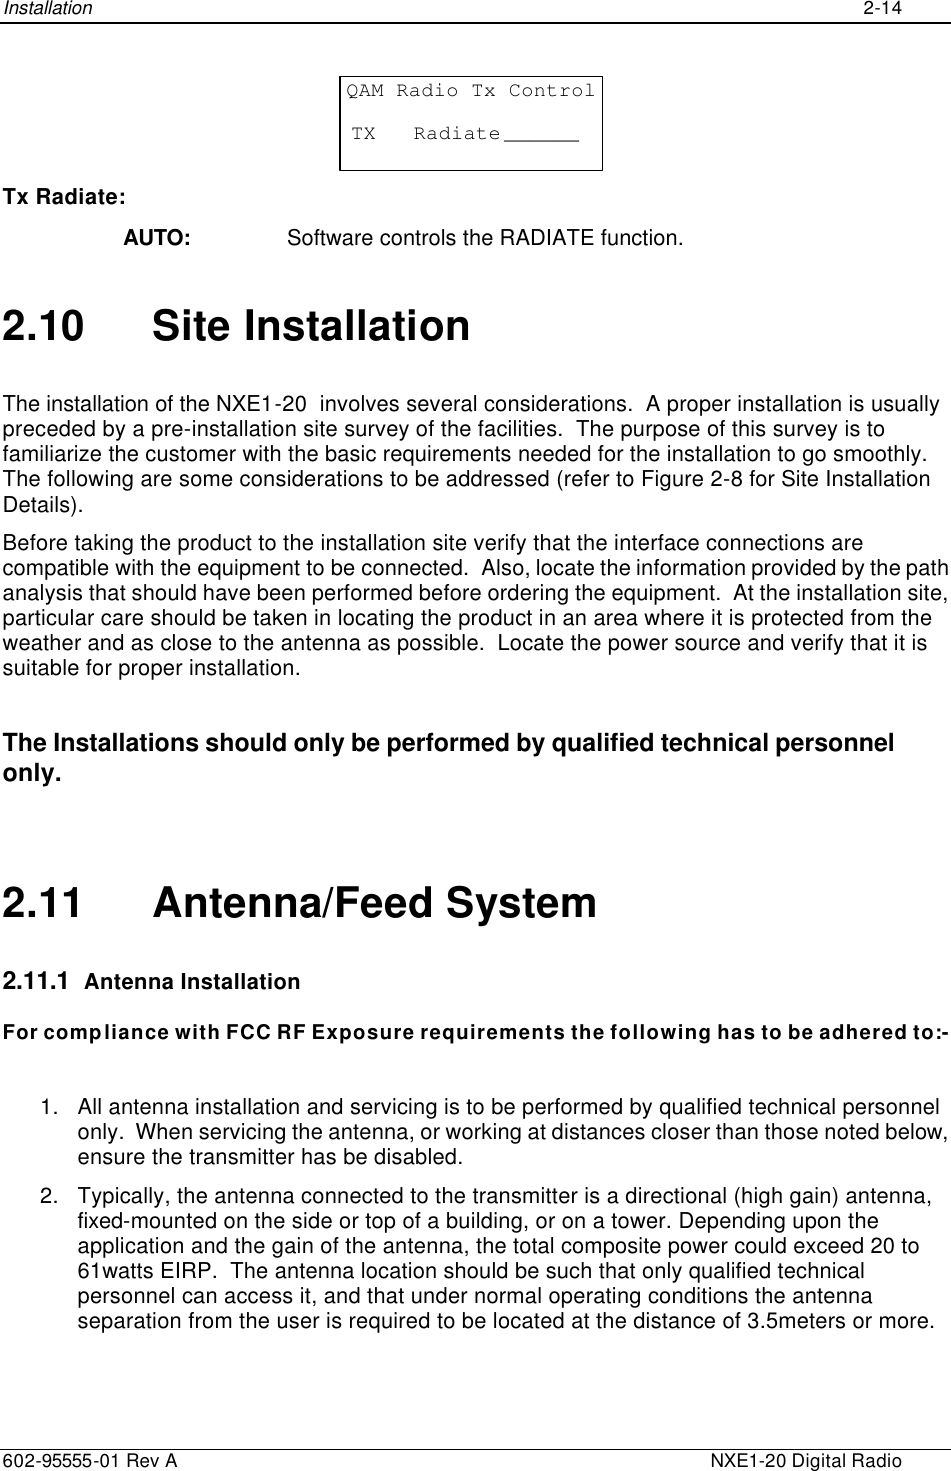 Installation    2-14  602-95555-01 Rev A    NXE1-20 Digital Radio QAM Radio Tx ControlTX   Radiate ______ Tx Radiate: AUTO: Software controls the RADIATE function. 2.10 Site Installation The installation of the NXE1-20  involves several considerations.  A proper installation is usually preceded by a pre-installation site survey of the facilities.  The purpose of this survey is to familiarize the customer with the basic requirements needed for the installation to go smoothly.  The following are some considerations to be addressed (refer to Figure 2-8 for Site Installation Details). Before taking the product to the installation site verify that the interface connections are compatible with the equipment to be connected.  Also, locate the information provided by the path analysis that should have been performed before ordering the equipment.  At the installation site, particular care should be taken in locating the product in an area where it is protected from the weather and as close to the antenna as possible.  Locate the power source and verify that it is suitable for proper installation.   The Installations should only be performed by qualified technical personnel only.  2.11 Antenna/Feed System 2.11.1  Antenna Installation  For compliance with FCC RF Exposure requirements the following has to be adhered to:-  1. All antenna installation and servicing is to be performed by qualified technical personnel only.  When servicing the antenna, or working at distances closer than those noted below, ensure the transmitter has be disabled. 2. Typically, the antenna connected to the transmitter is a directional (high gain) antenna, fixed-mounted on the side or top of a building, or on a tower. Depending upon the application and the gain of the antenna, the total composite power could exceed 20 to 61watts EIRP.  The antenna location should be such that only qualified technical personnel can access it, and that under normal operating conditions the antenna separation from the user is required to be located at the distance of 3.5meters or more. 